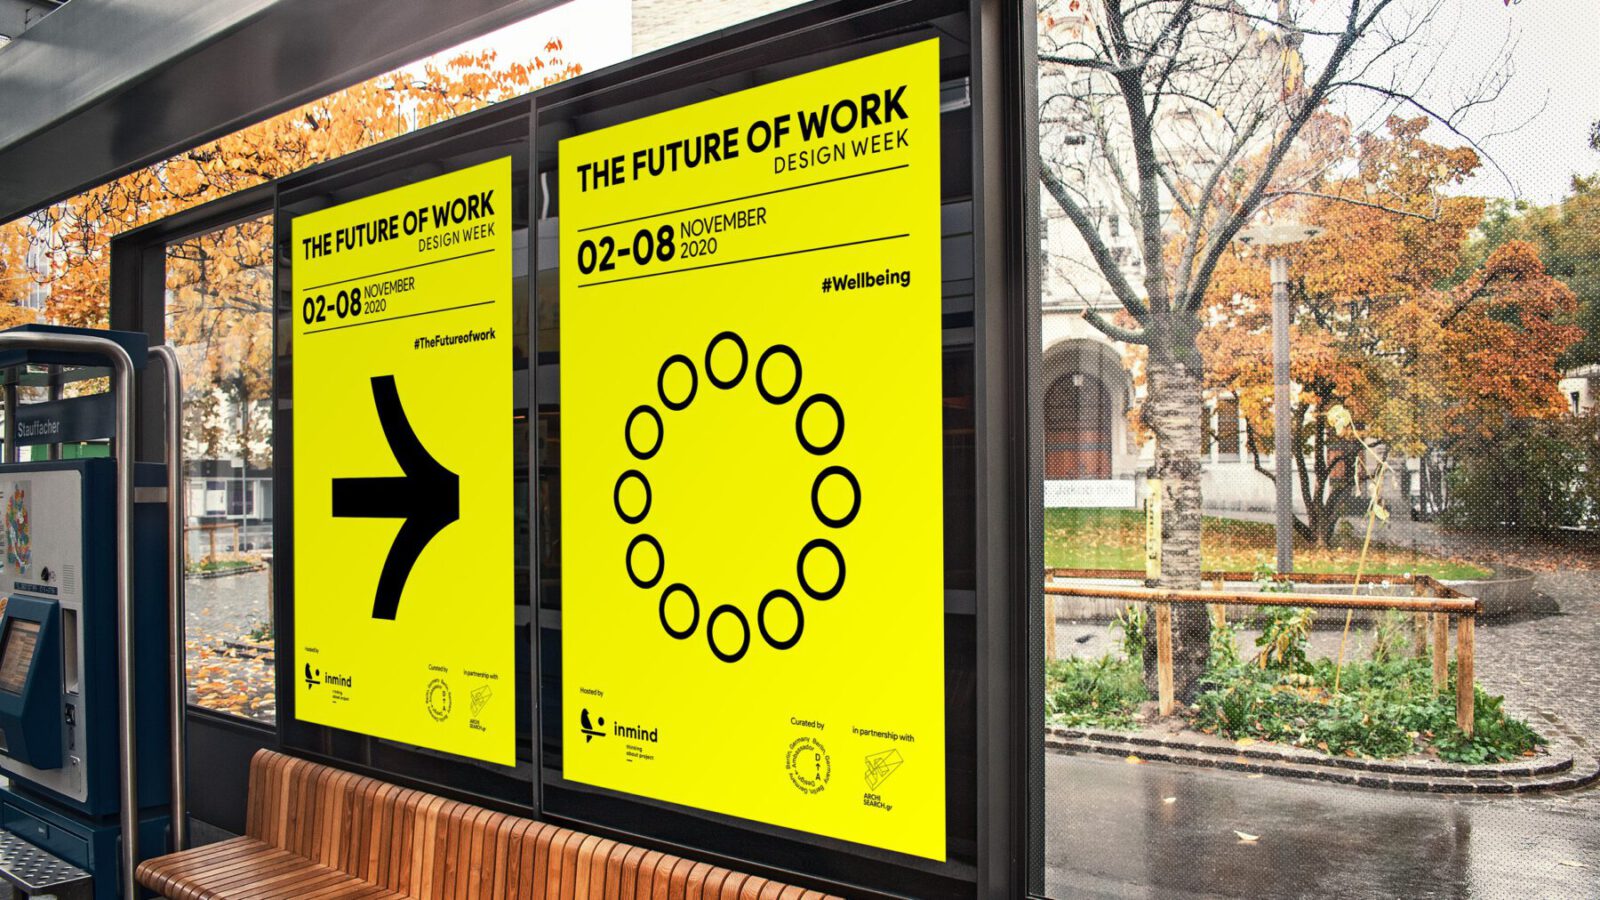 Archisearch THE FUTURE OF WORK DESIGN WEEK | Hosted by Inmind